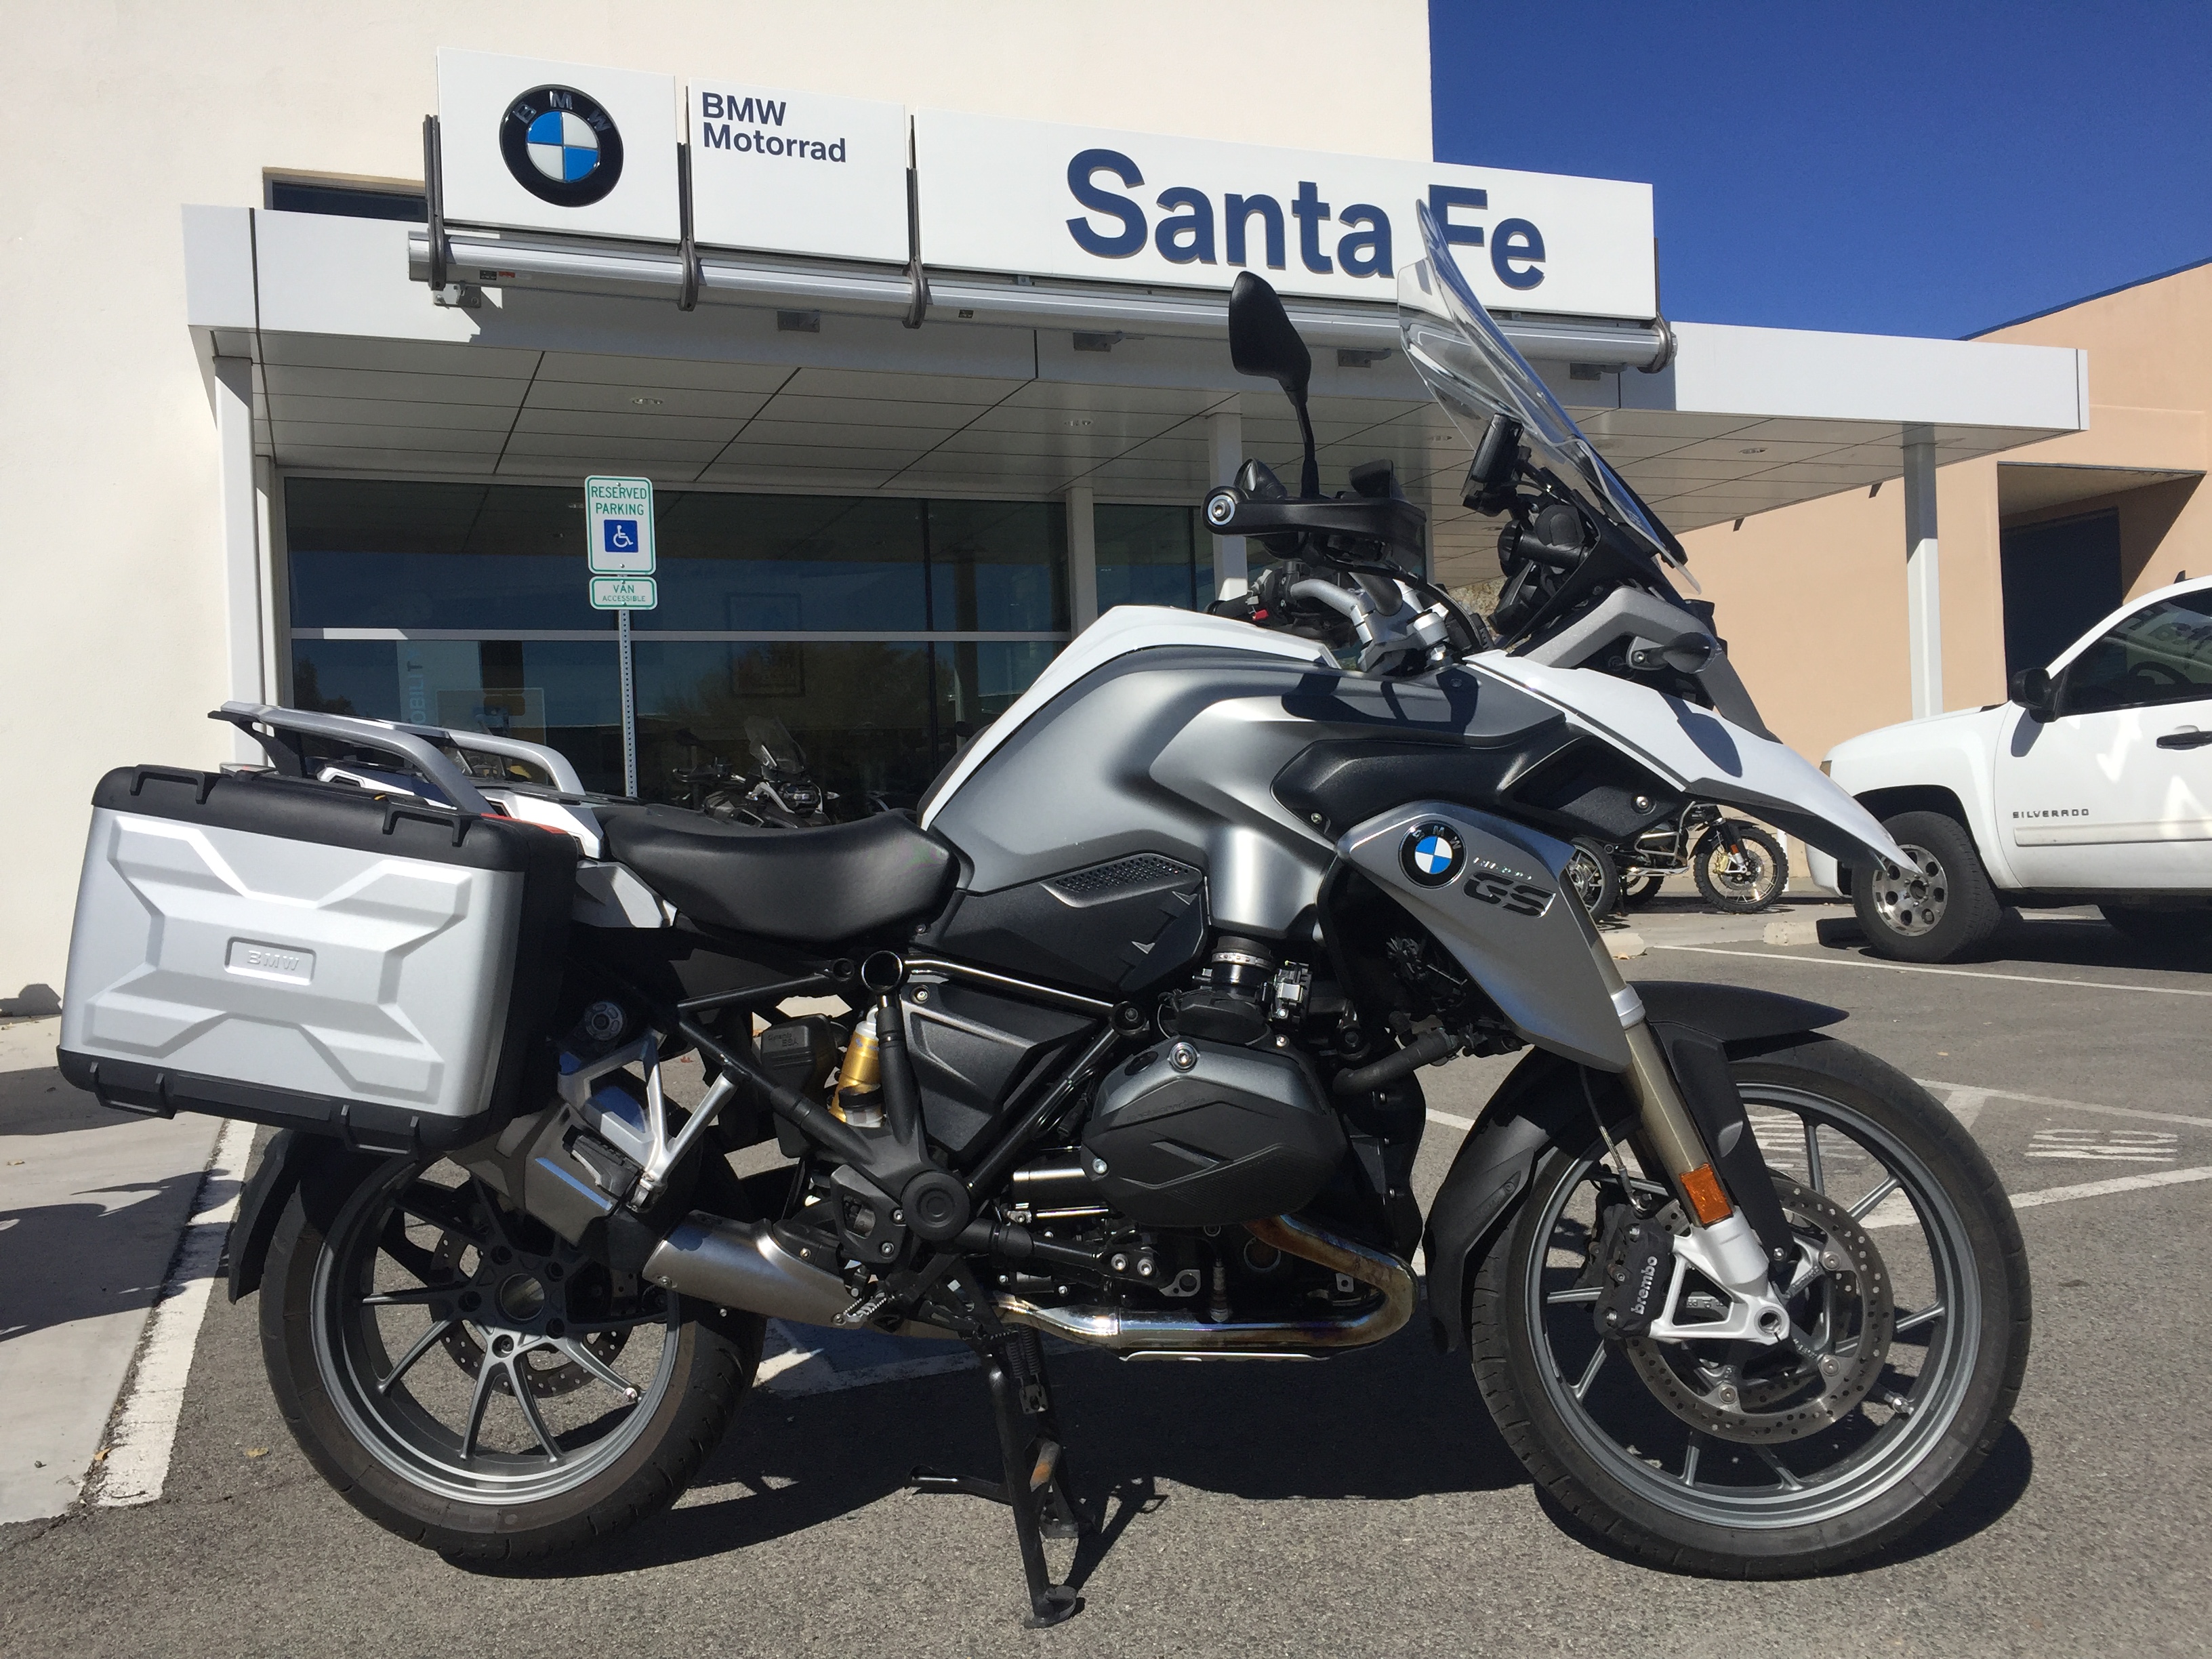 Pre-Owned Motorcycle Inventory - R1200GS - Santa Fe BMW Motorcycles